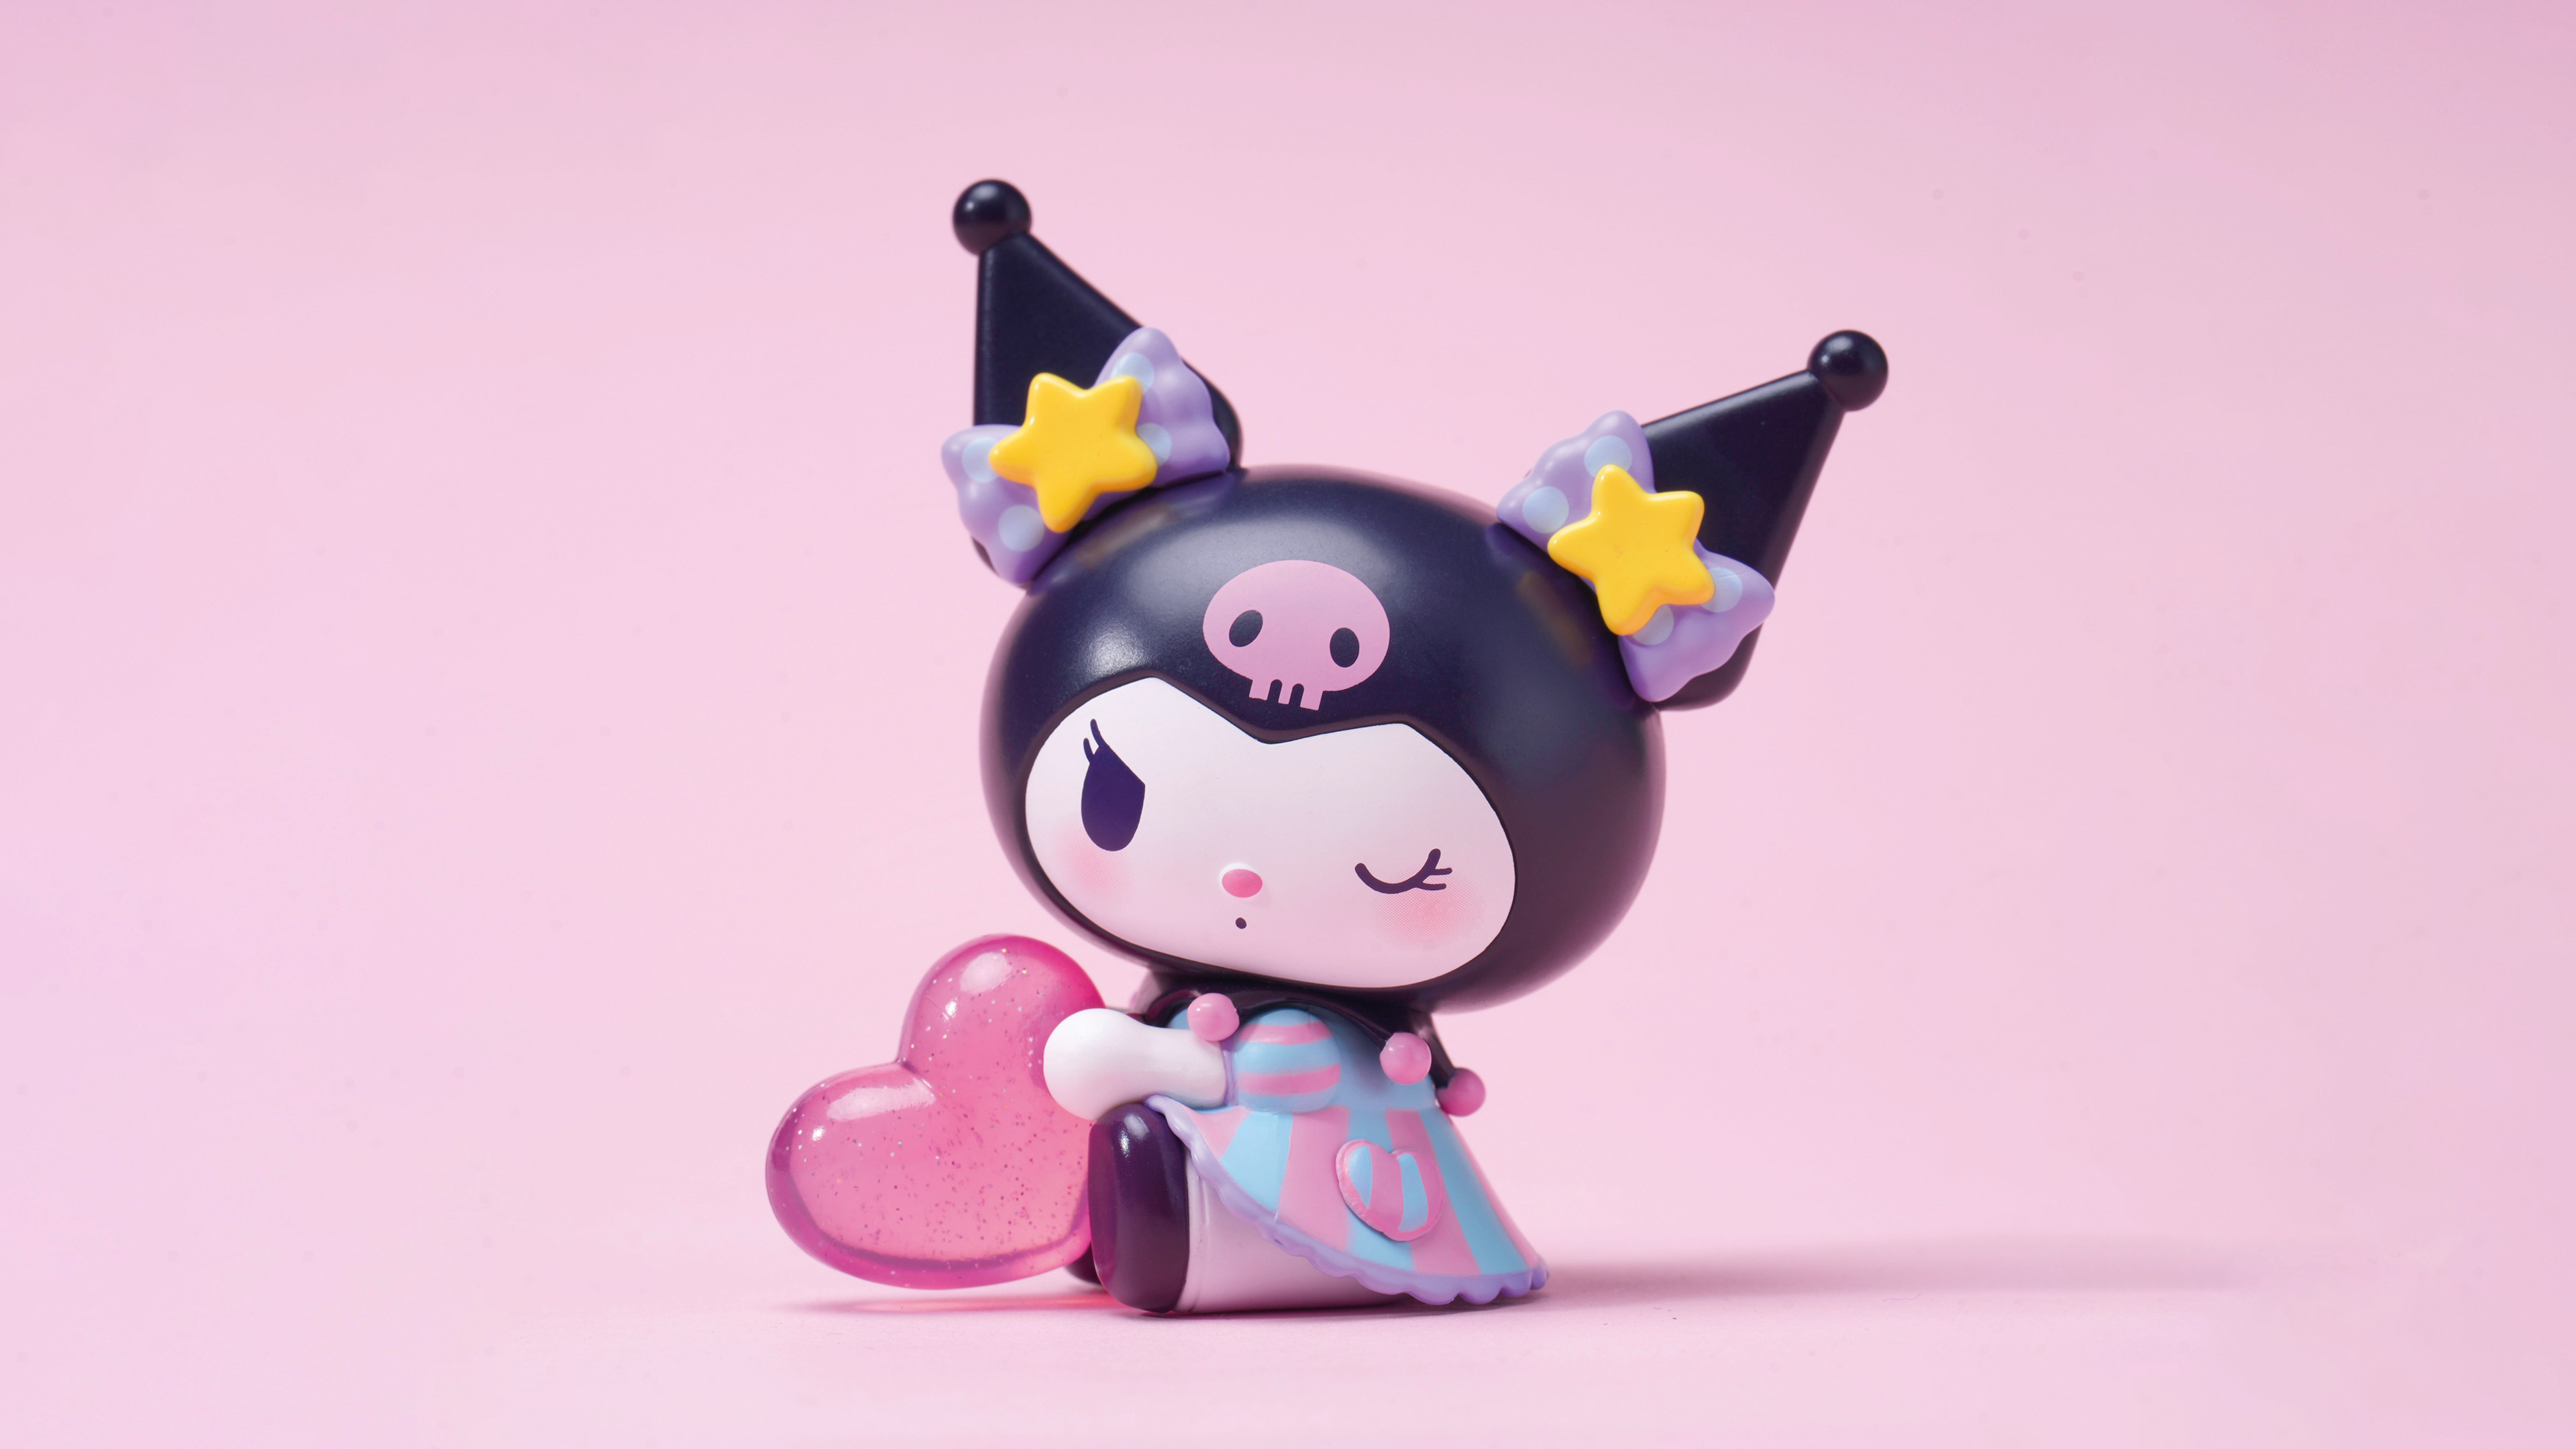 HD wallpaper featuring the kawaii character Kuromi from Onegai My Melody against a pink background, perfect for anime and Sanrio fans' desktops.